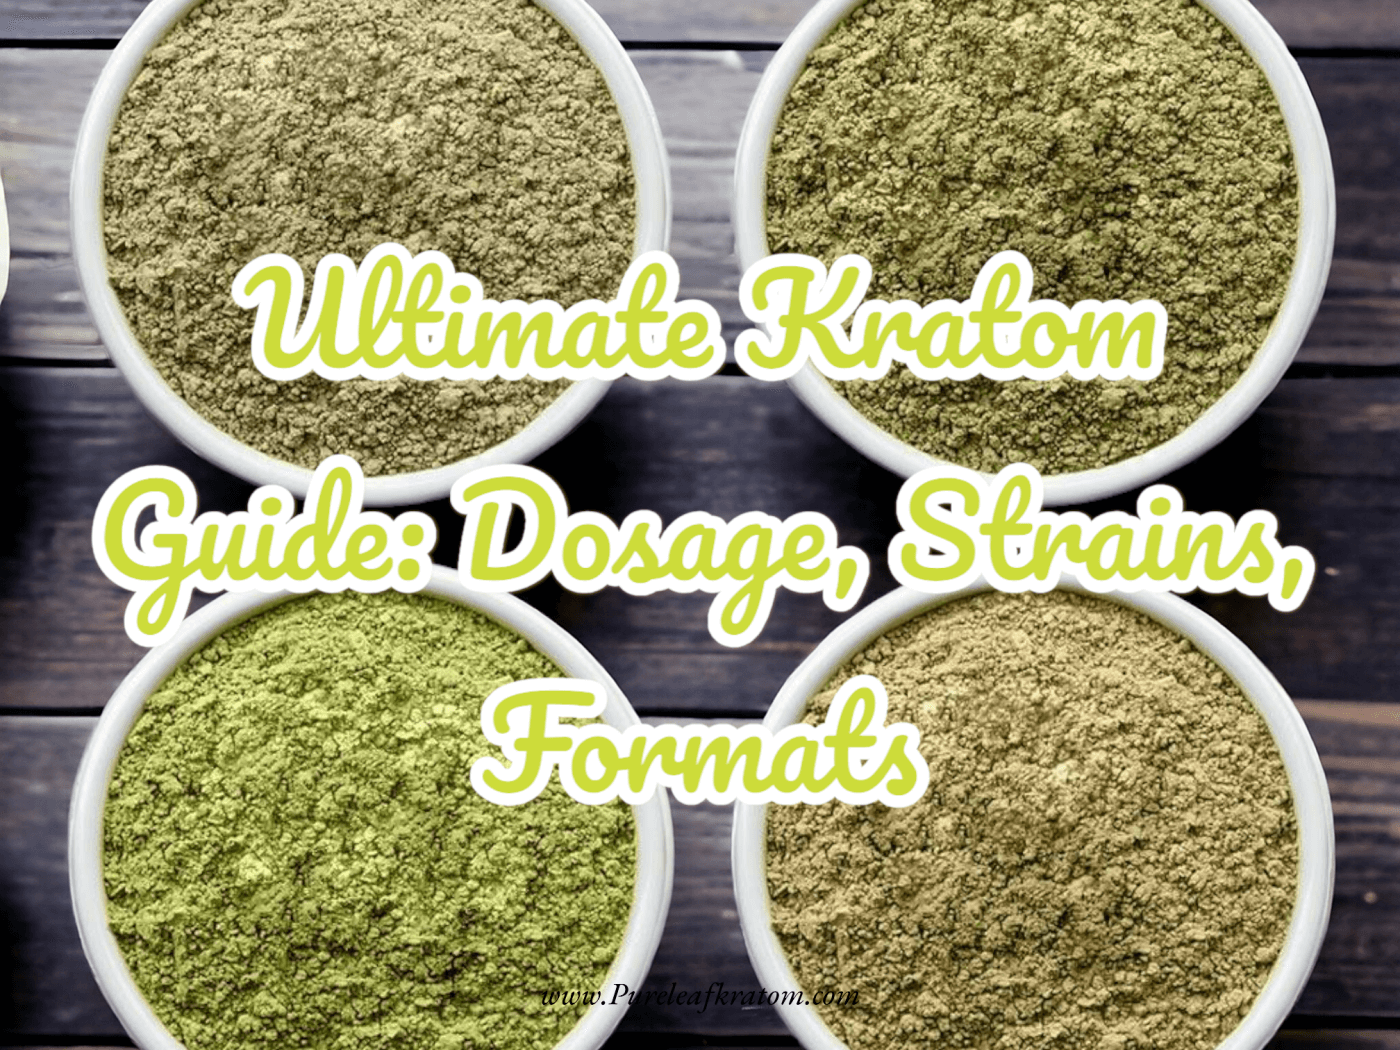 Mastering Kratom: The Beginner's Guide to Dosages, Formats, and Safe Use